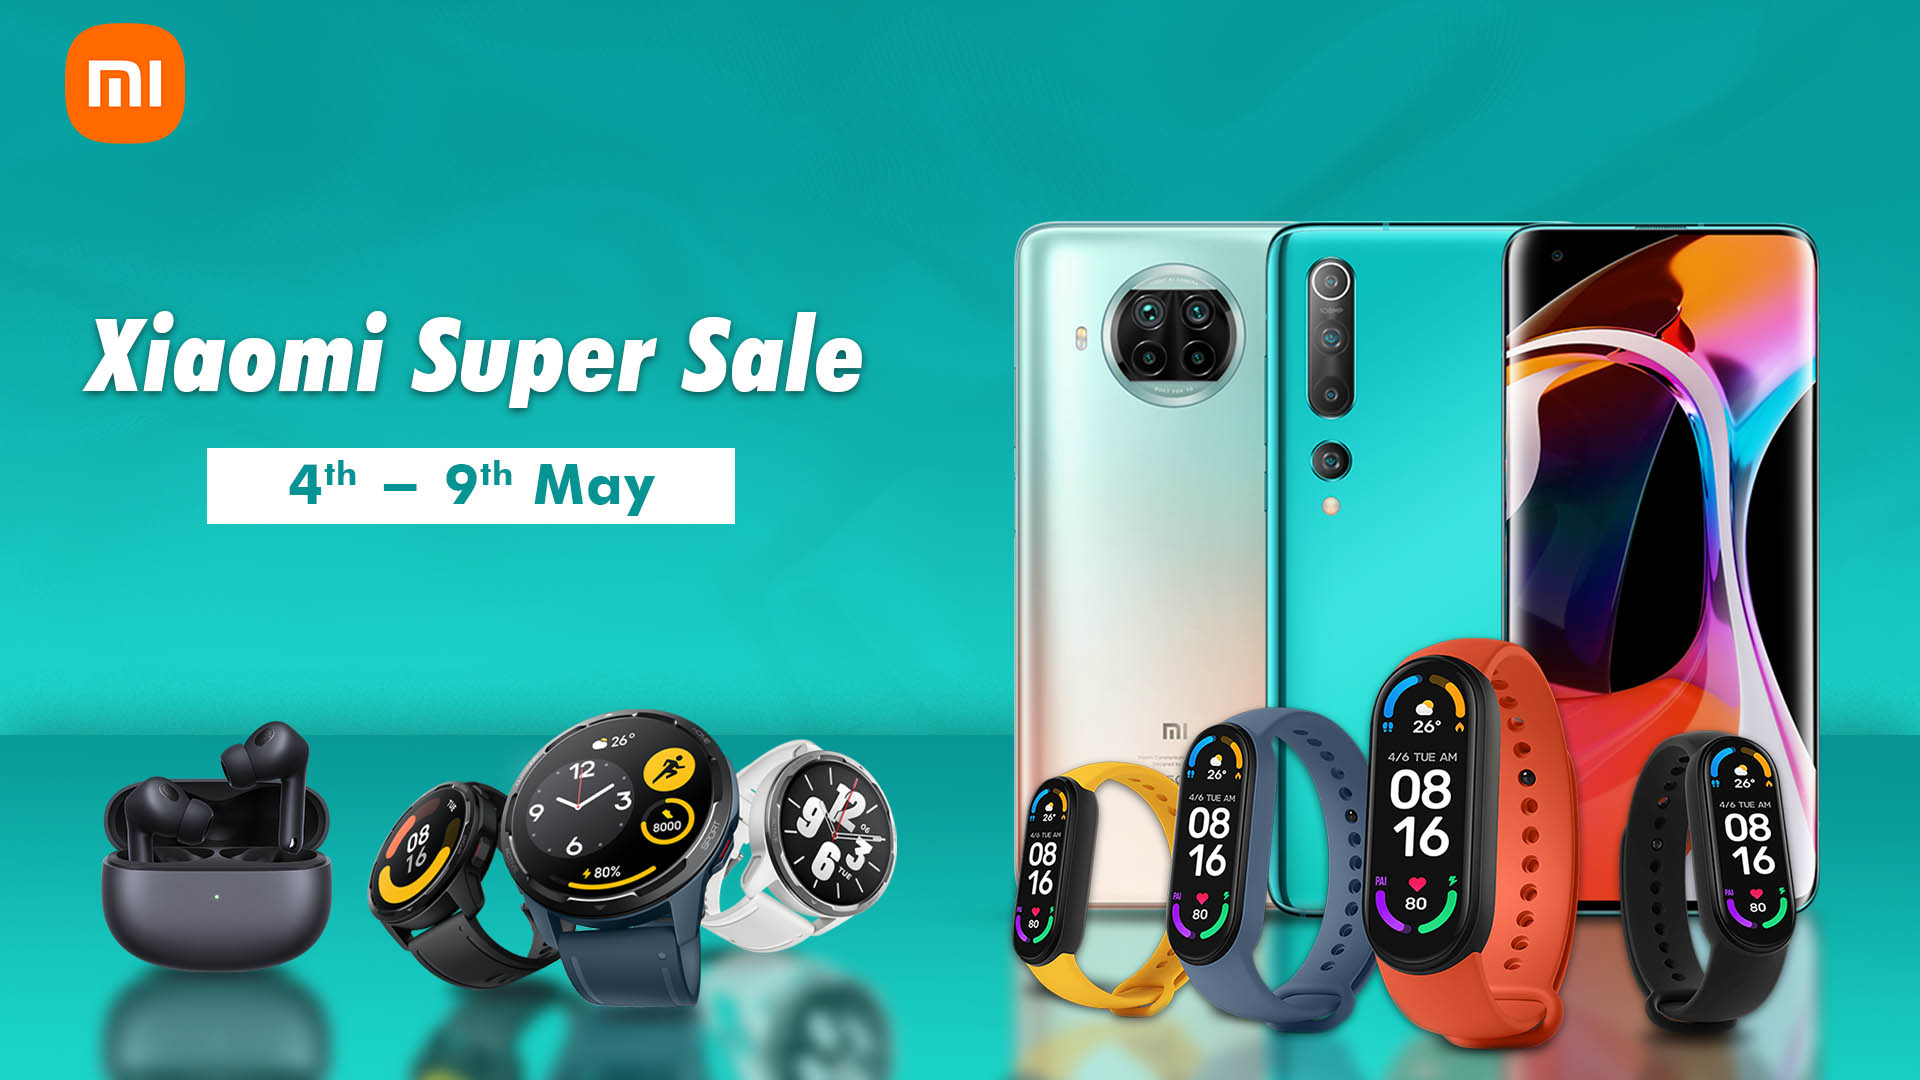 Exciting offers on all Xiaomi products